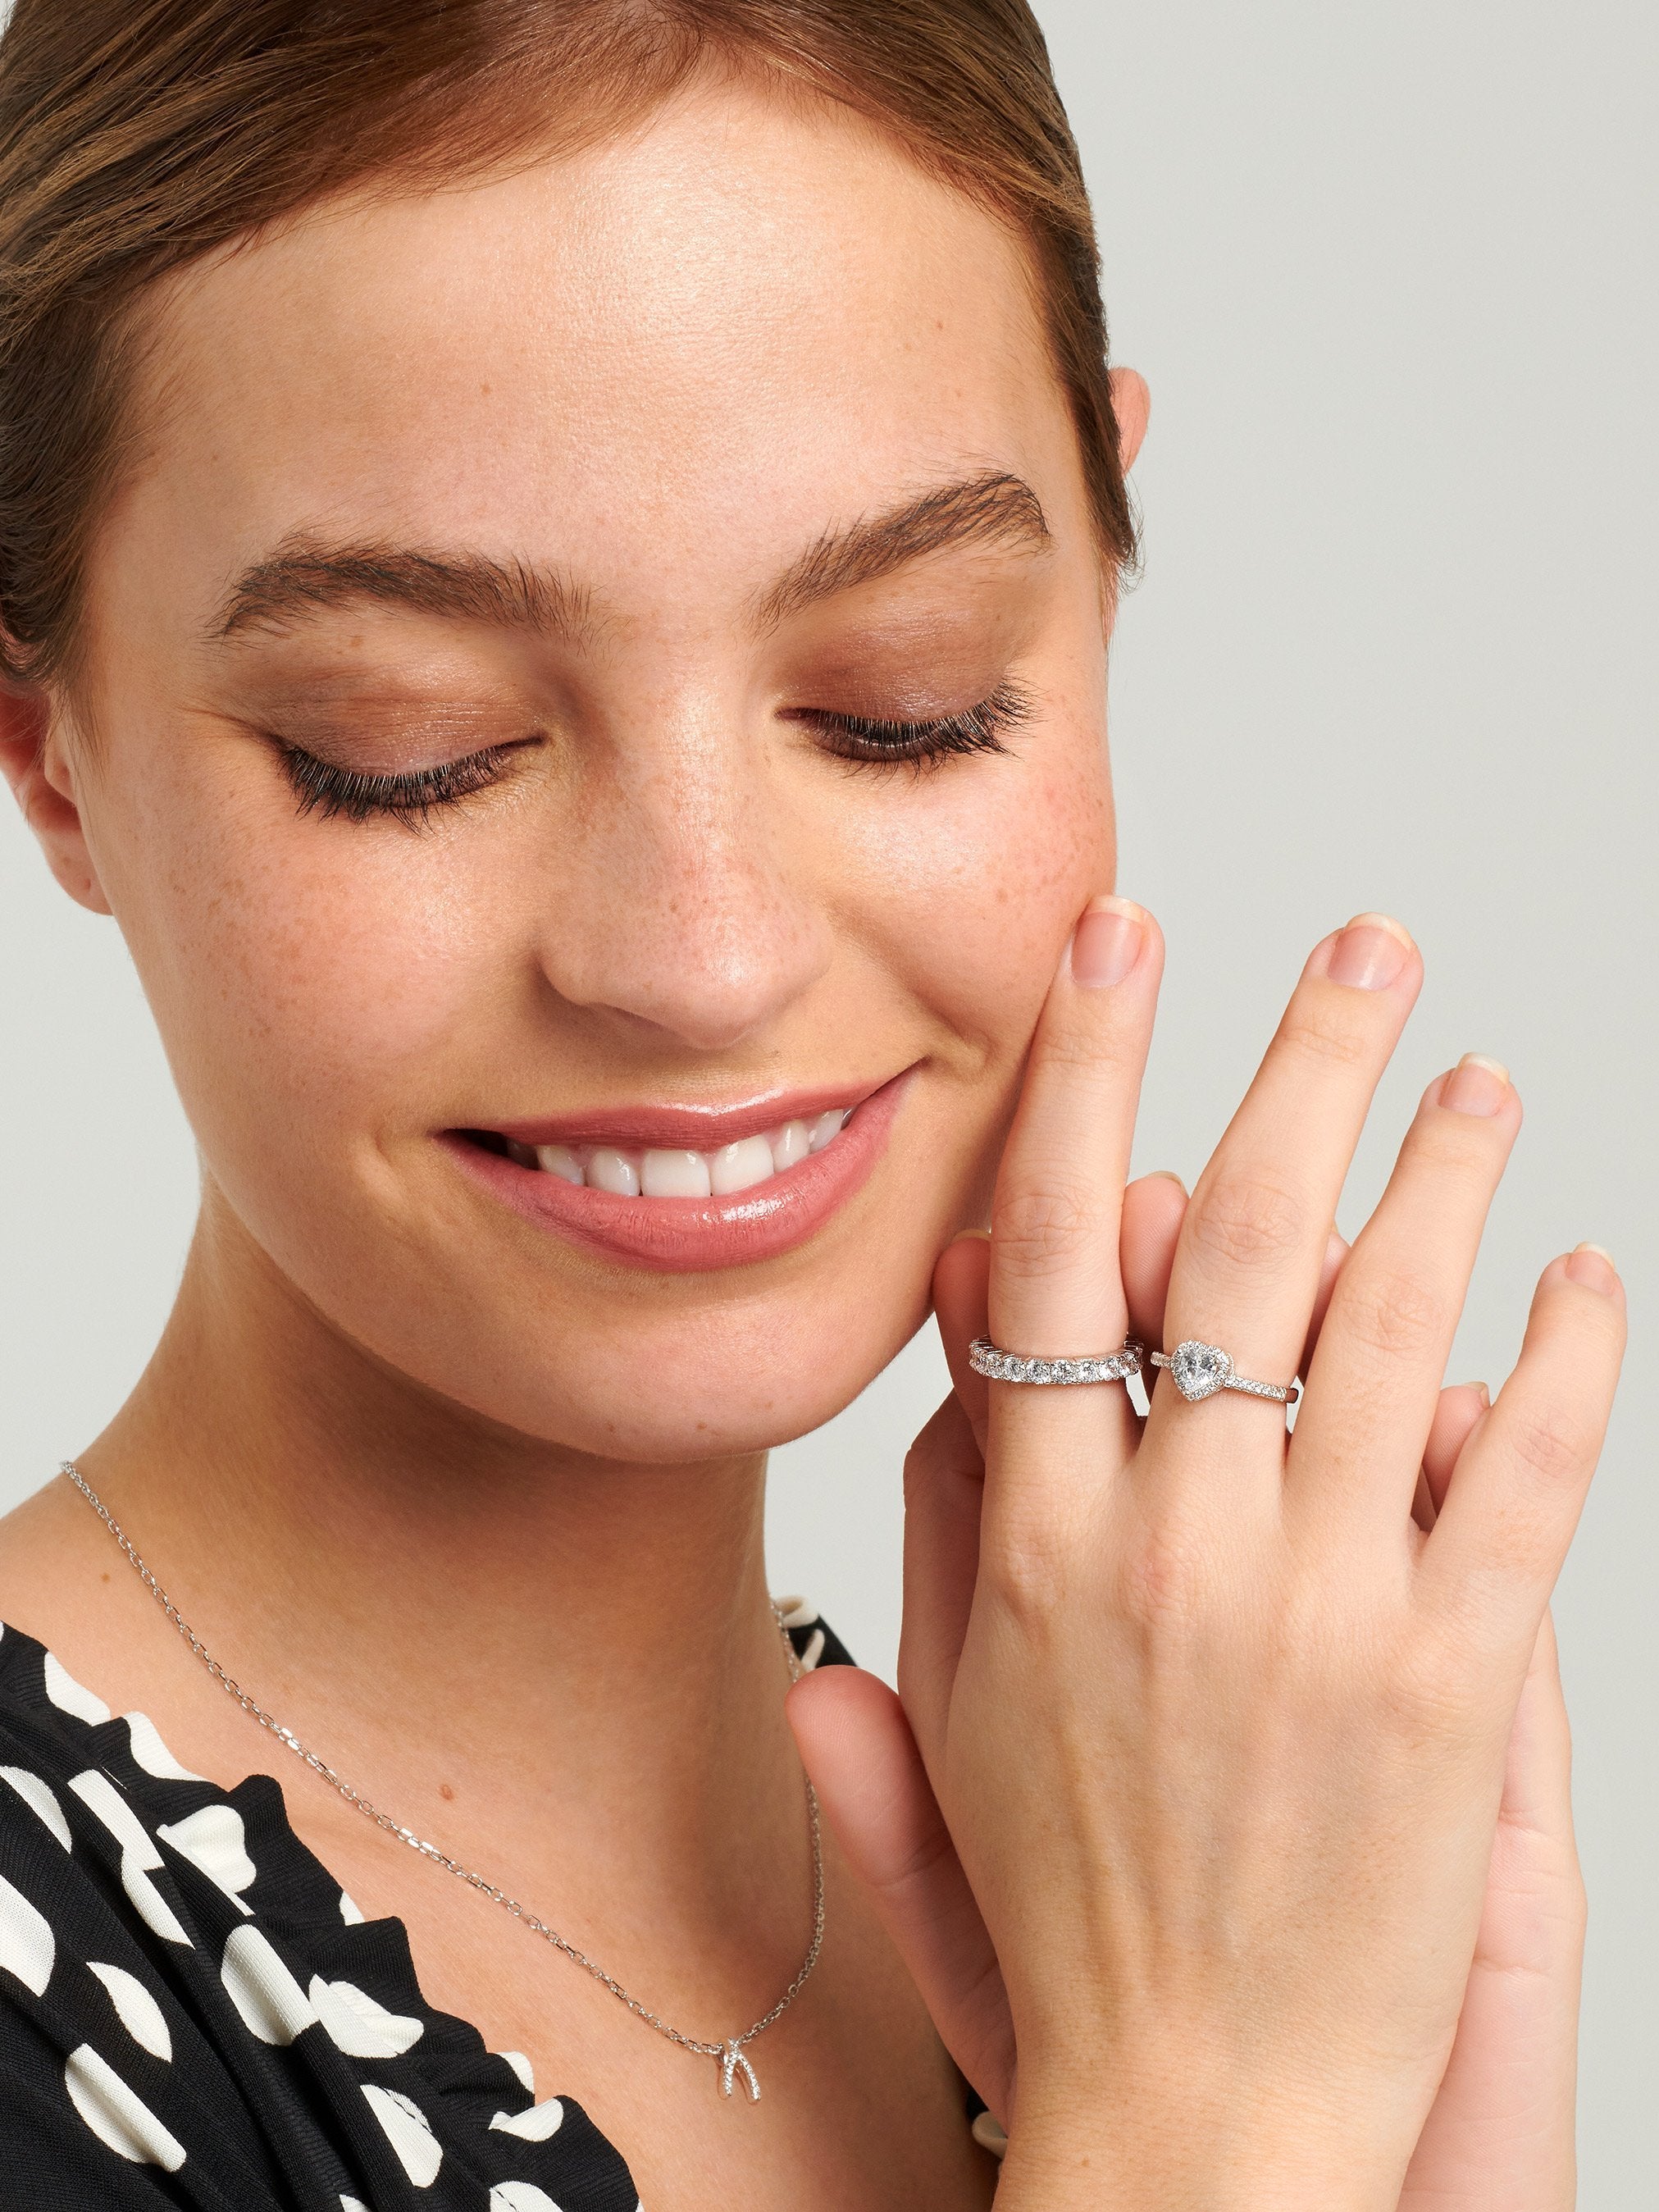 Female wearing sterling silver heart ring with a silver eternity band.